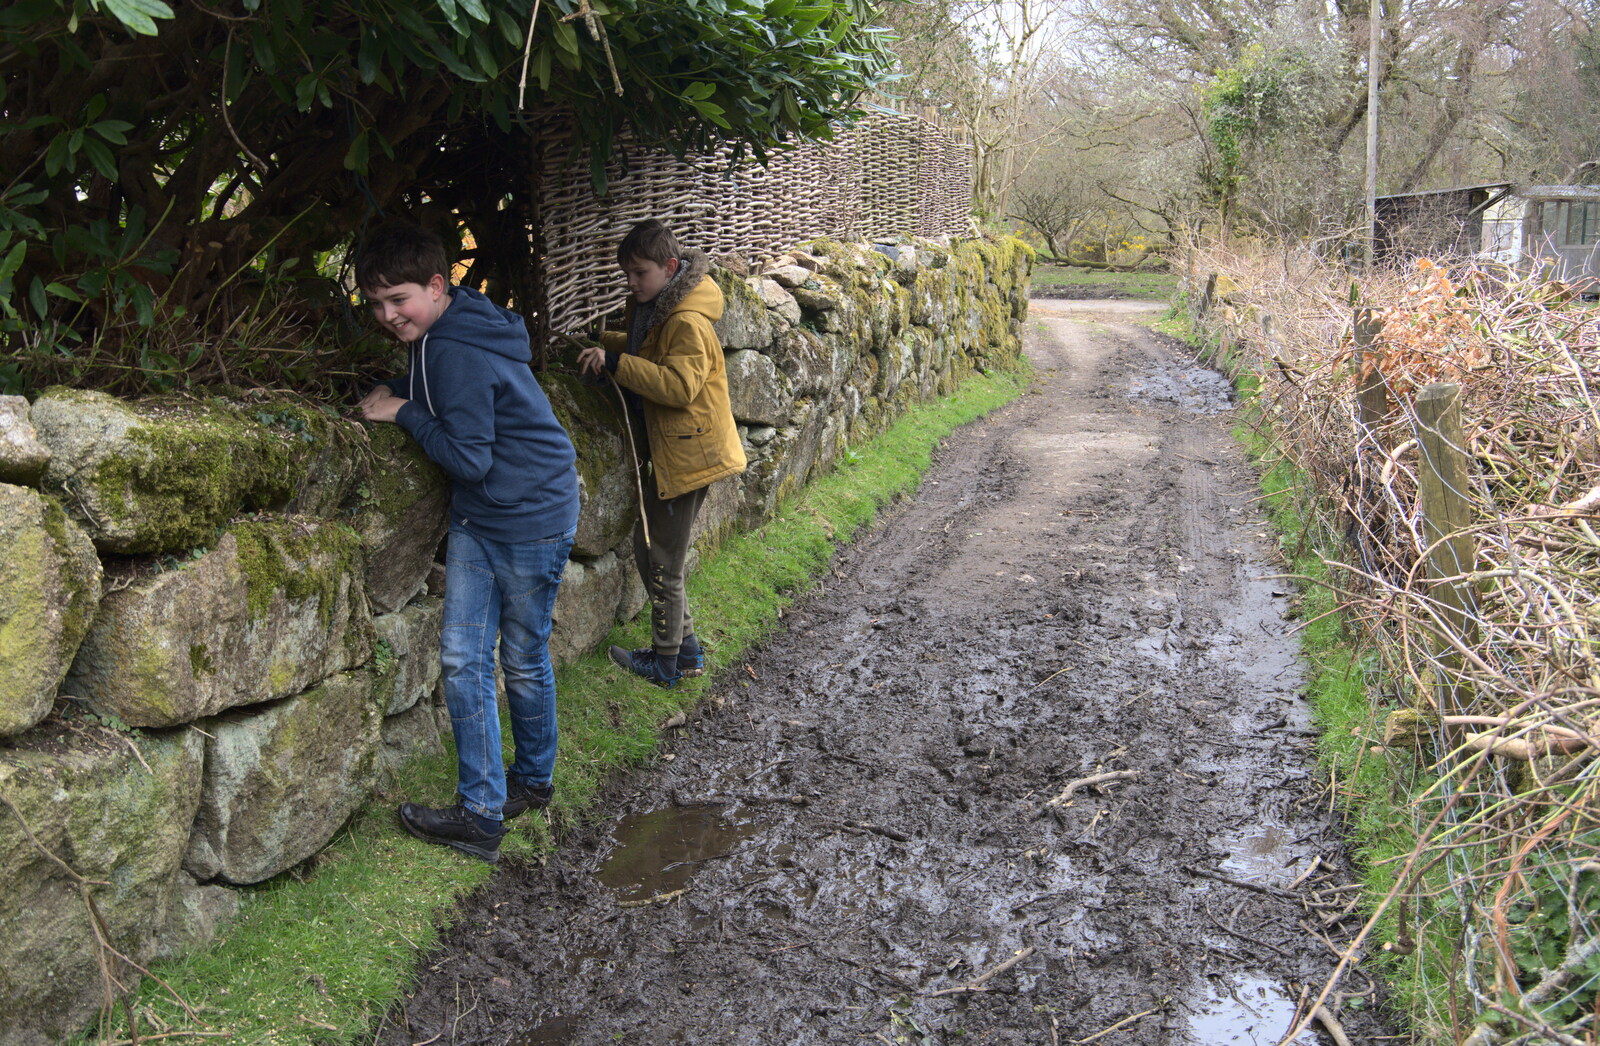 The boys avoid a very muddy path from Easter in South Zeal and Moretonhampstead, Devon - 9th April